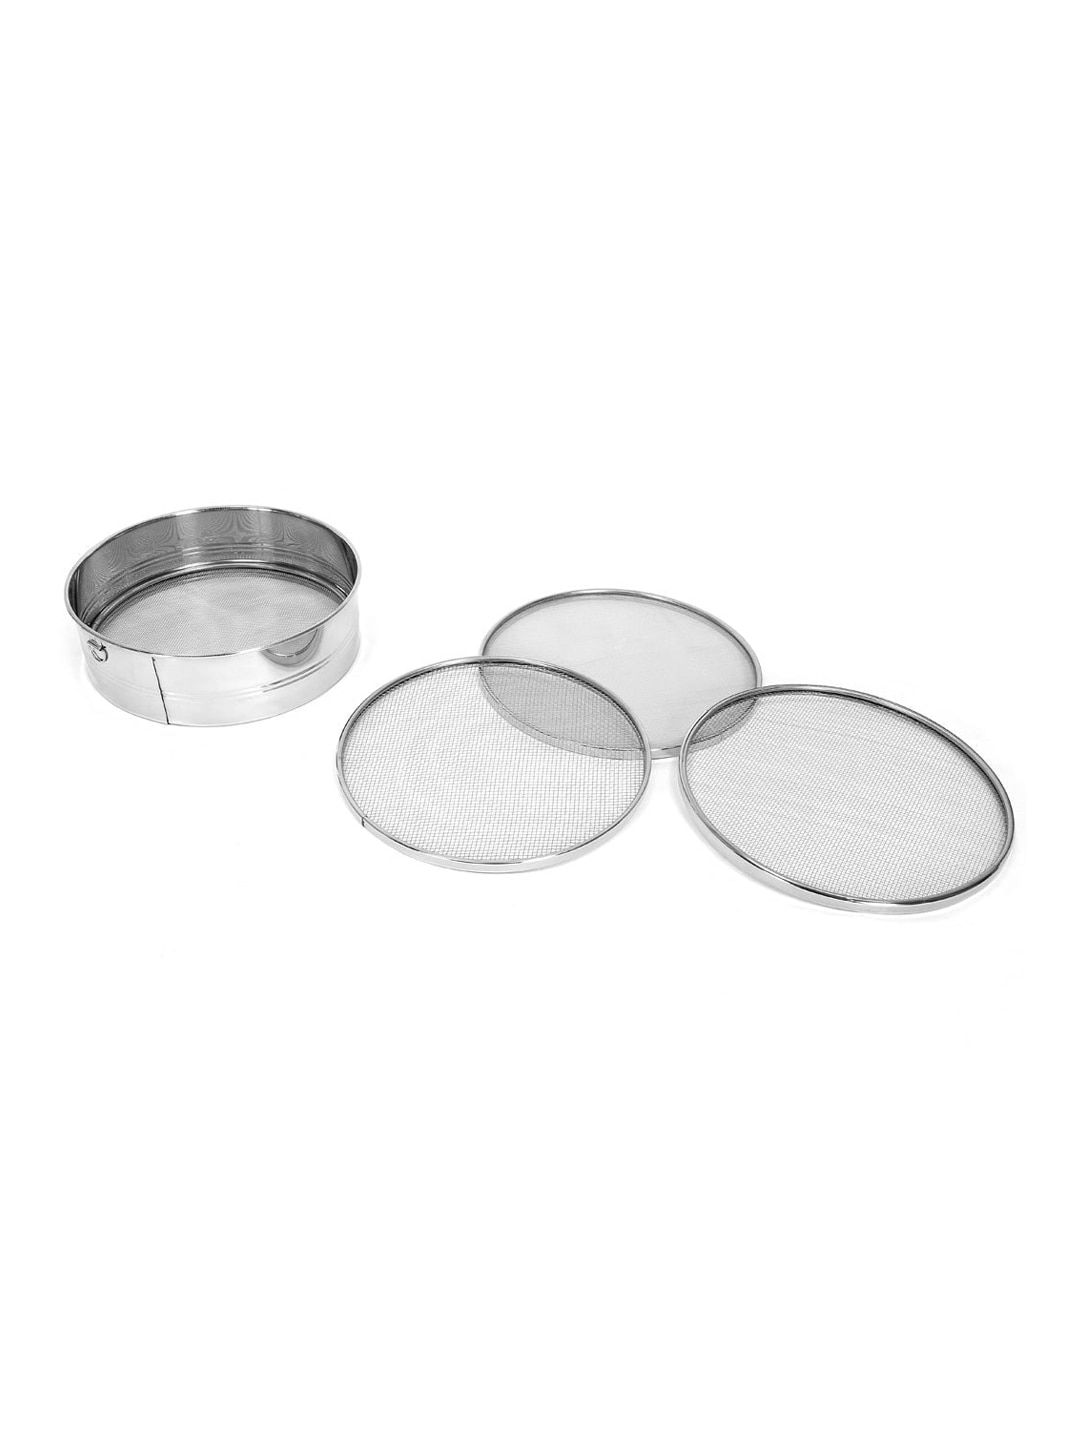 Athome by Nilkamal Grey Stainless Steel Inter-Changeable Strainer Price in India